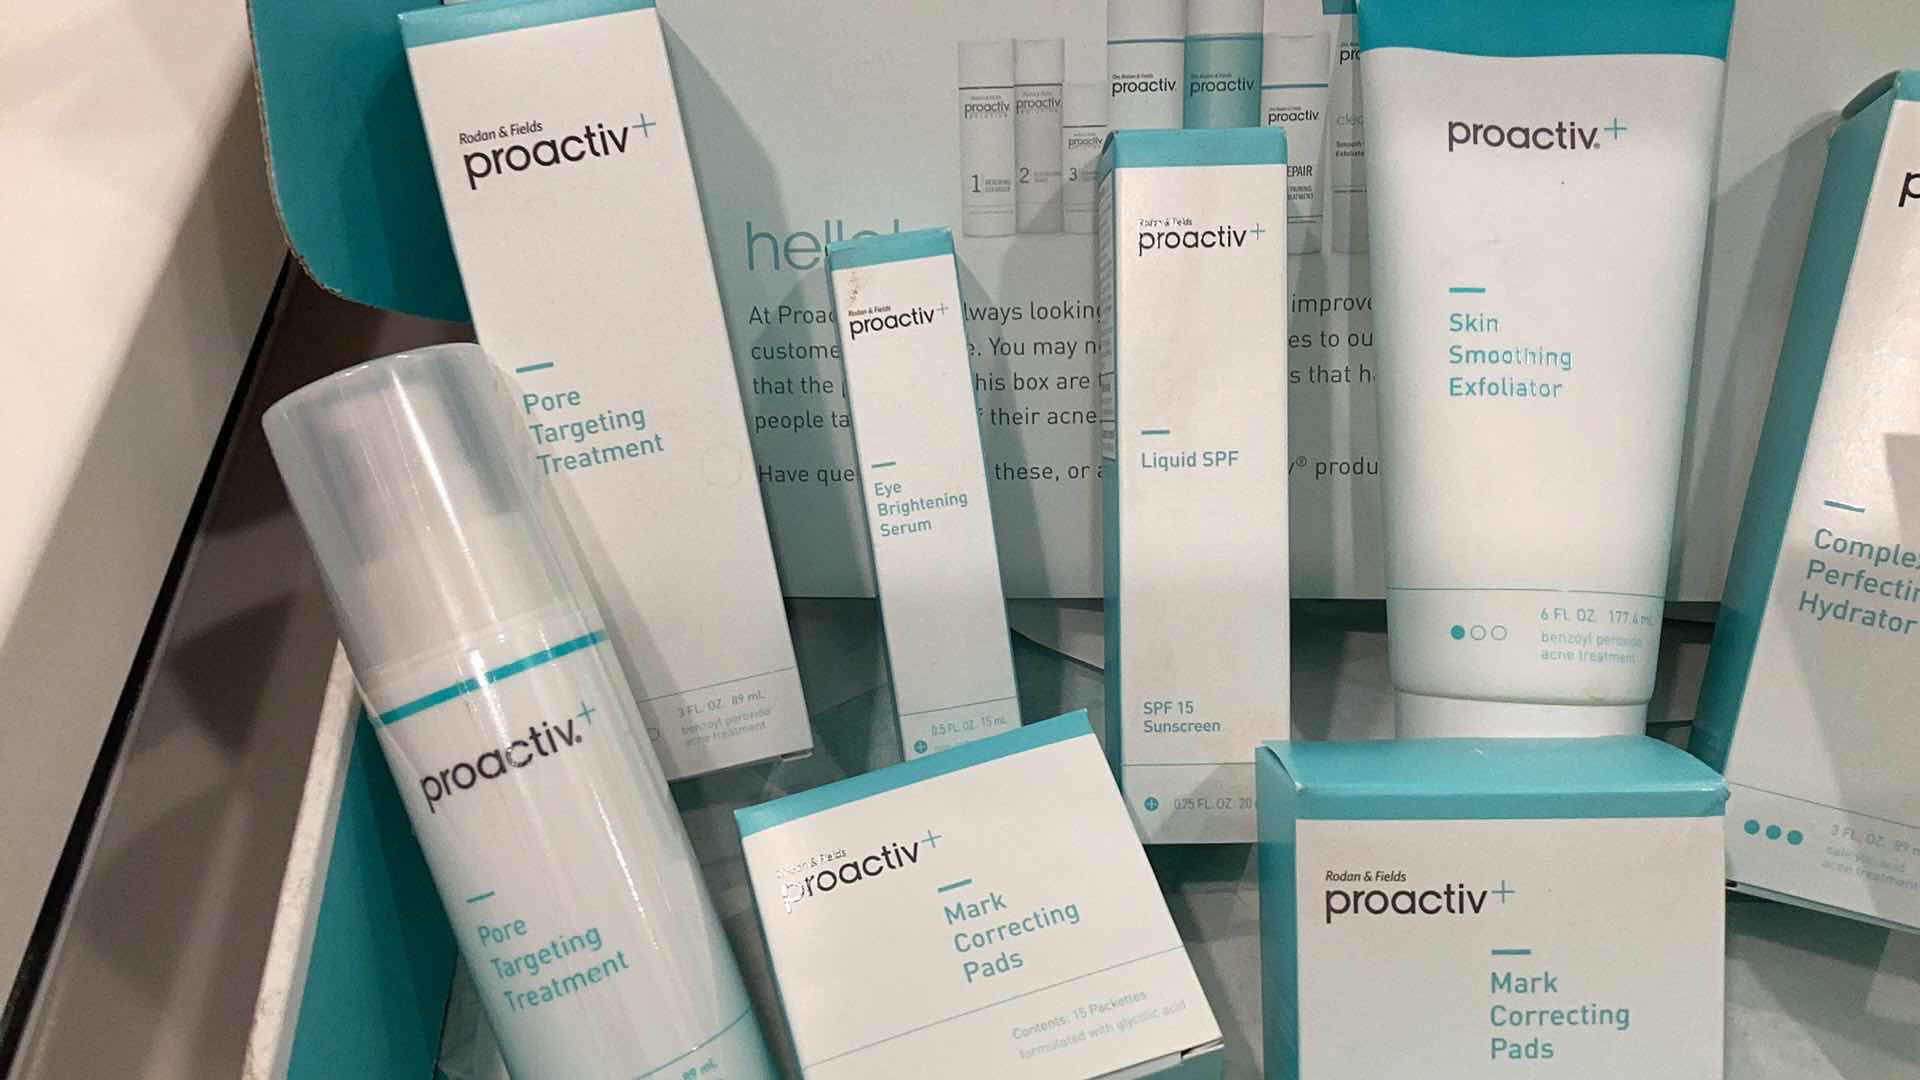 Photo 3 of PROACTIVE EXPIRED BUT FACTORY SEALED INCLUDES COMPLEXION PERFECTING HYDRATOR, SKIN SMOOTHING EXFOLIATOR, MARK CORRECTING PADS, AND OTHER SKIN ESSENTIALS FOR EVERYDAY ROUTINE. - 